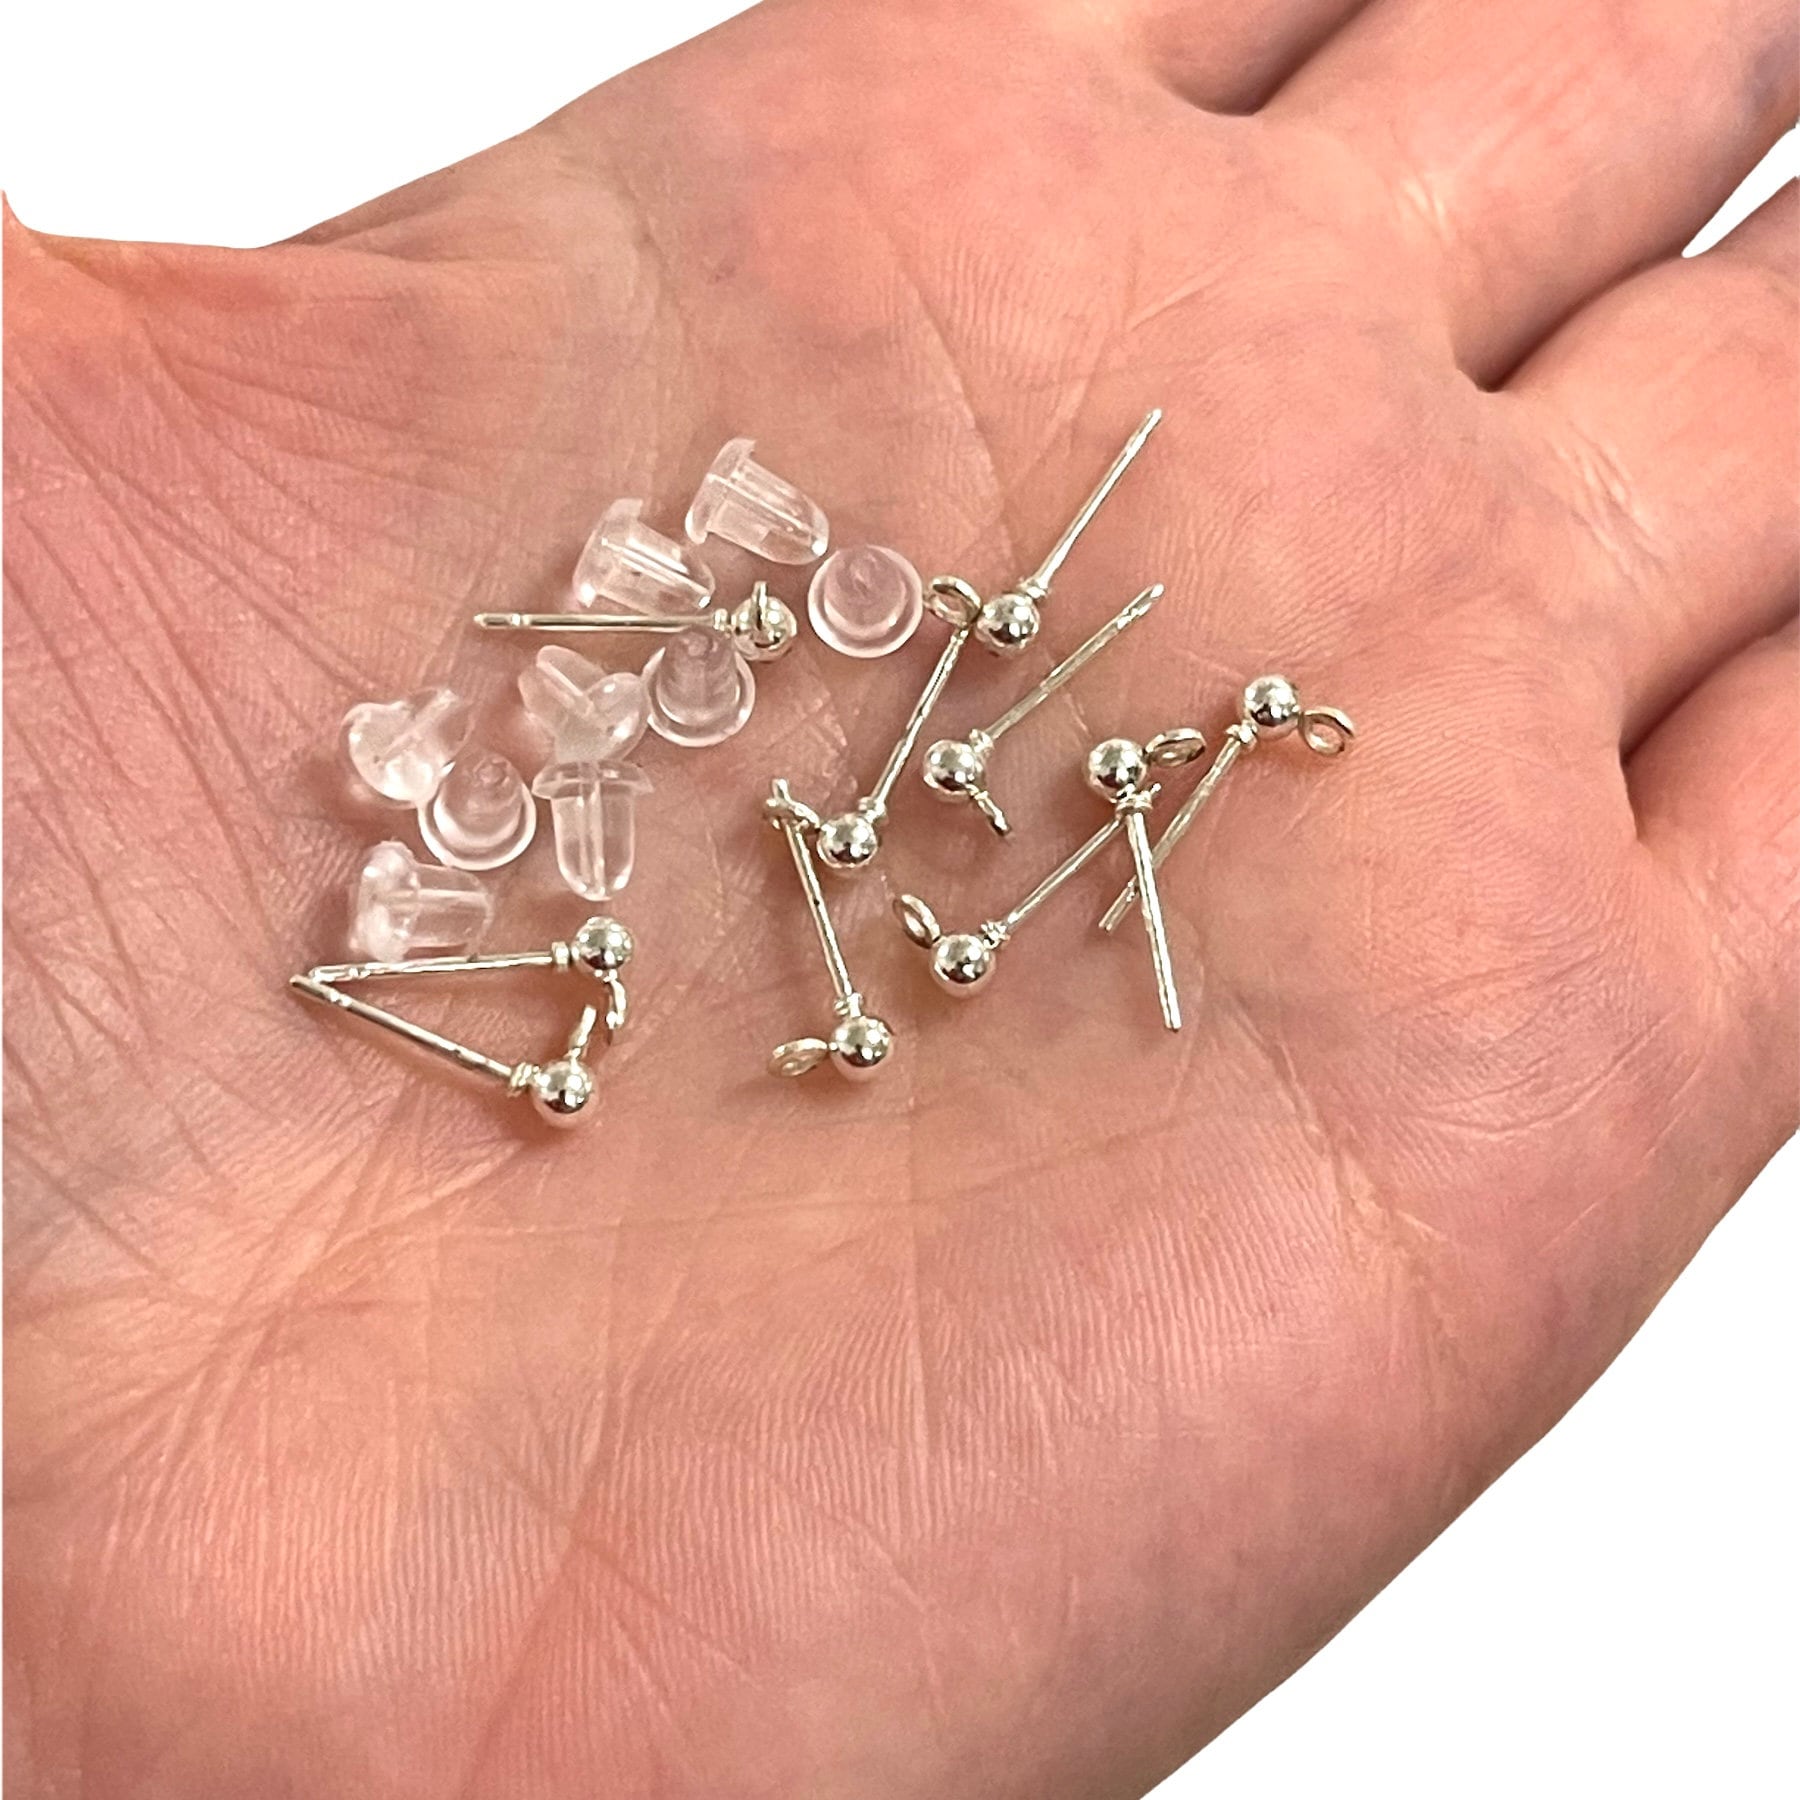 1 Pair Bag of 3 mm Silver Ball Earring Post